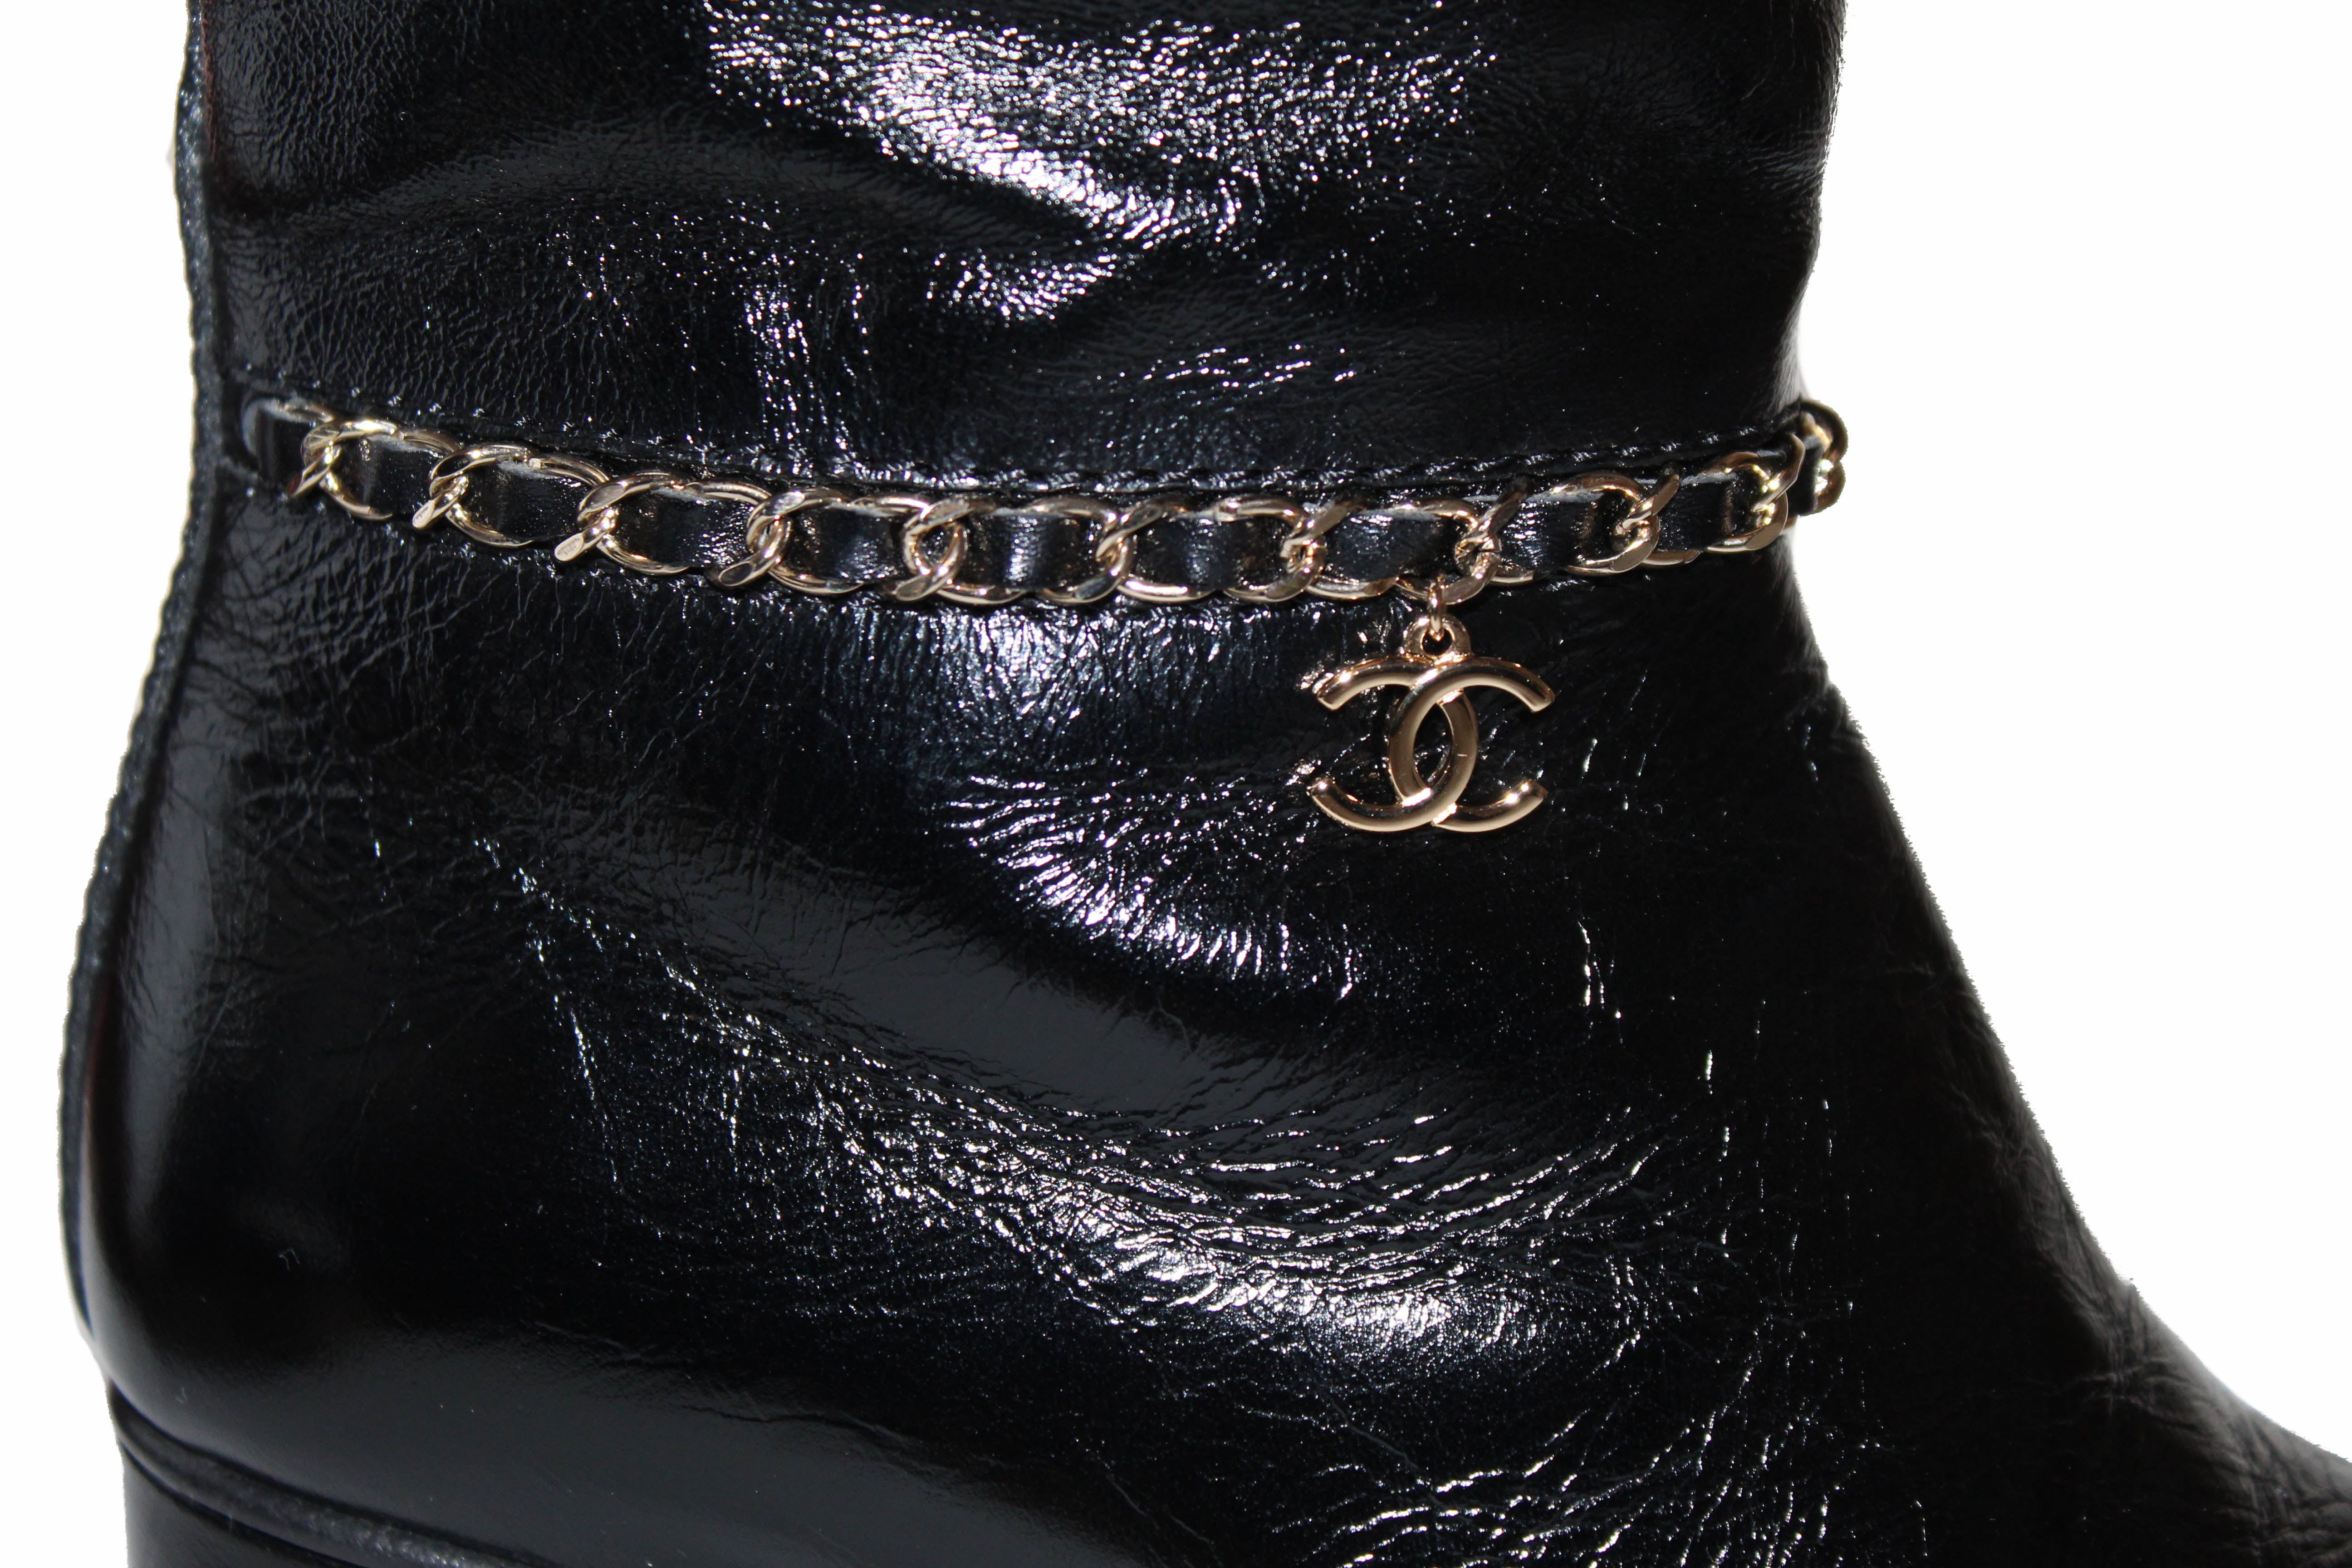 Chanel Patent Leather Heel Chain Boots in Black size 38C – Chicago  Consignment